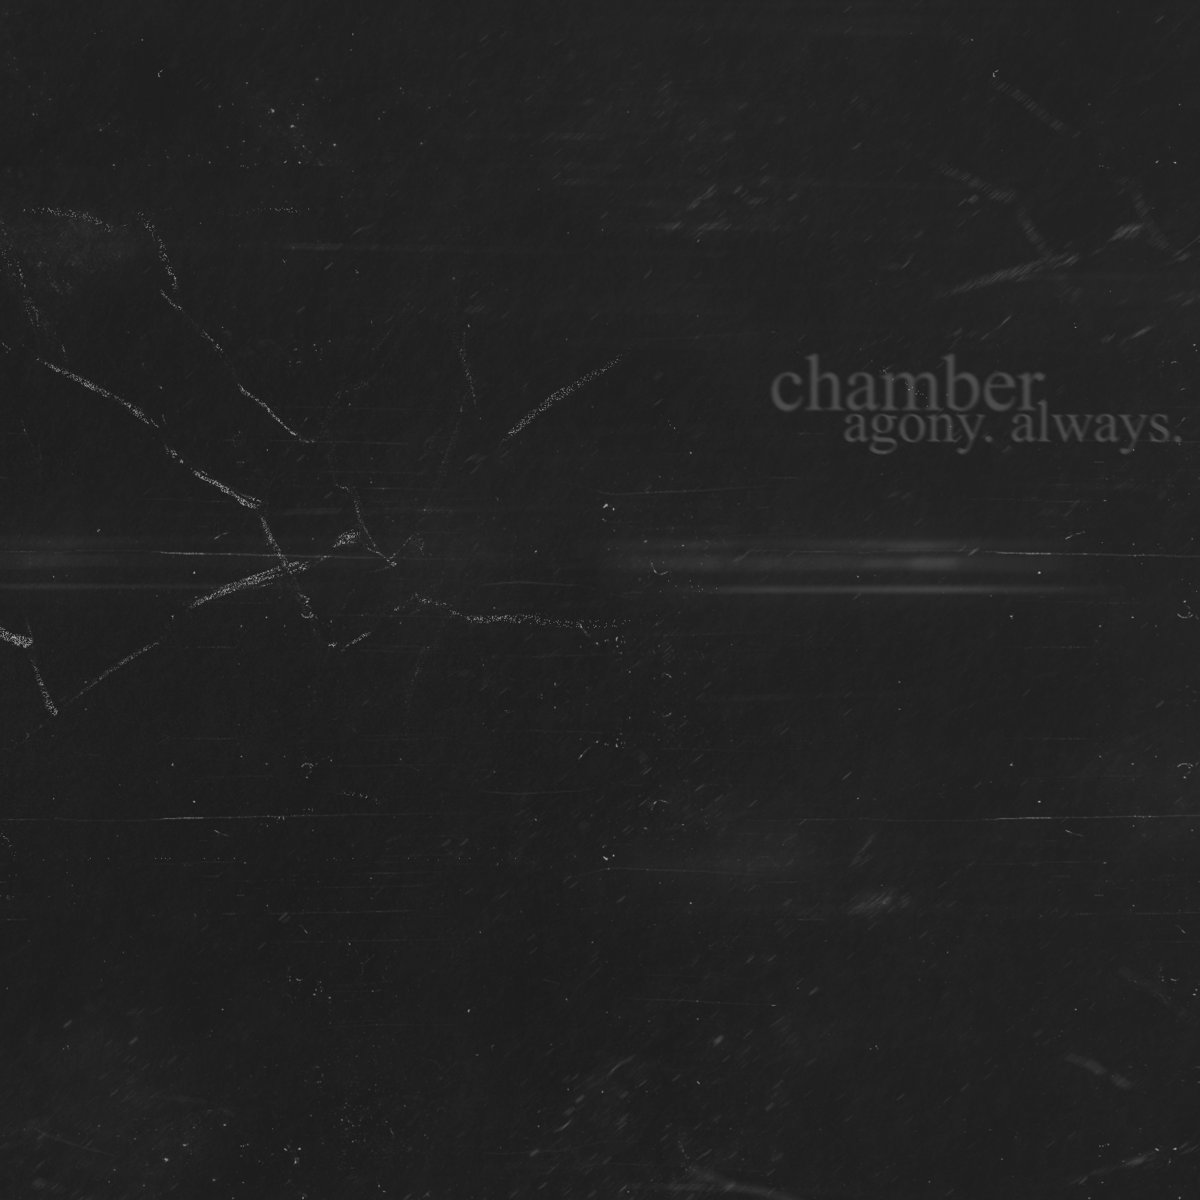 CHAMBER - Agony. Always. cover 